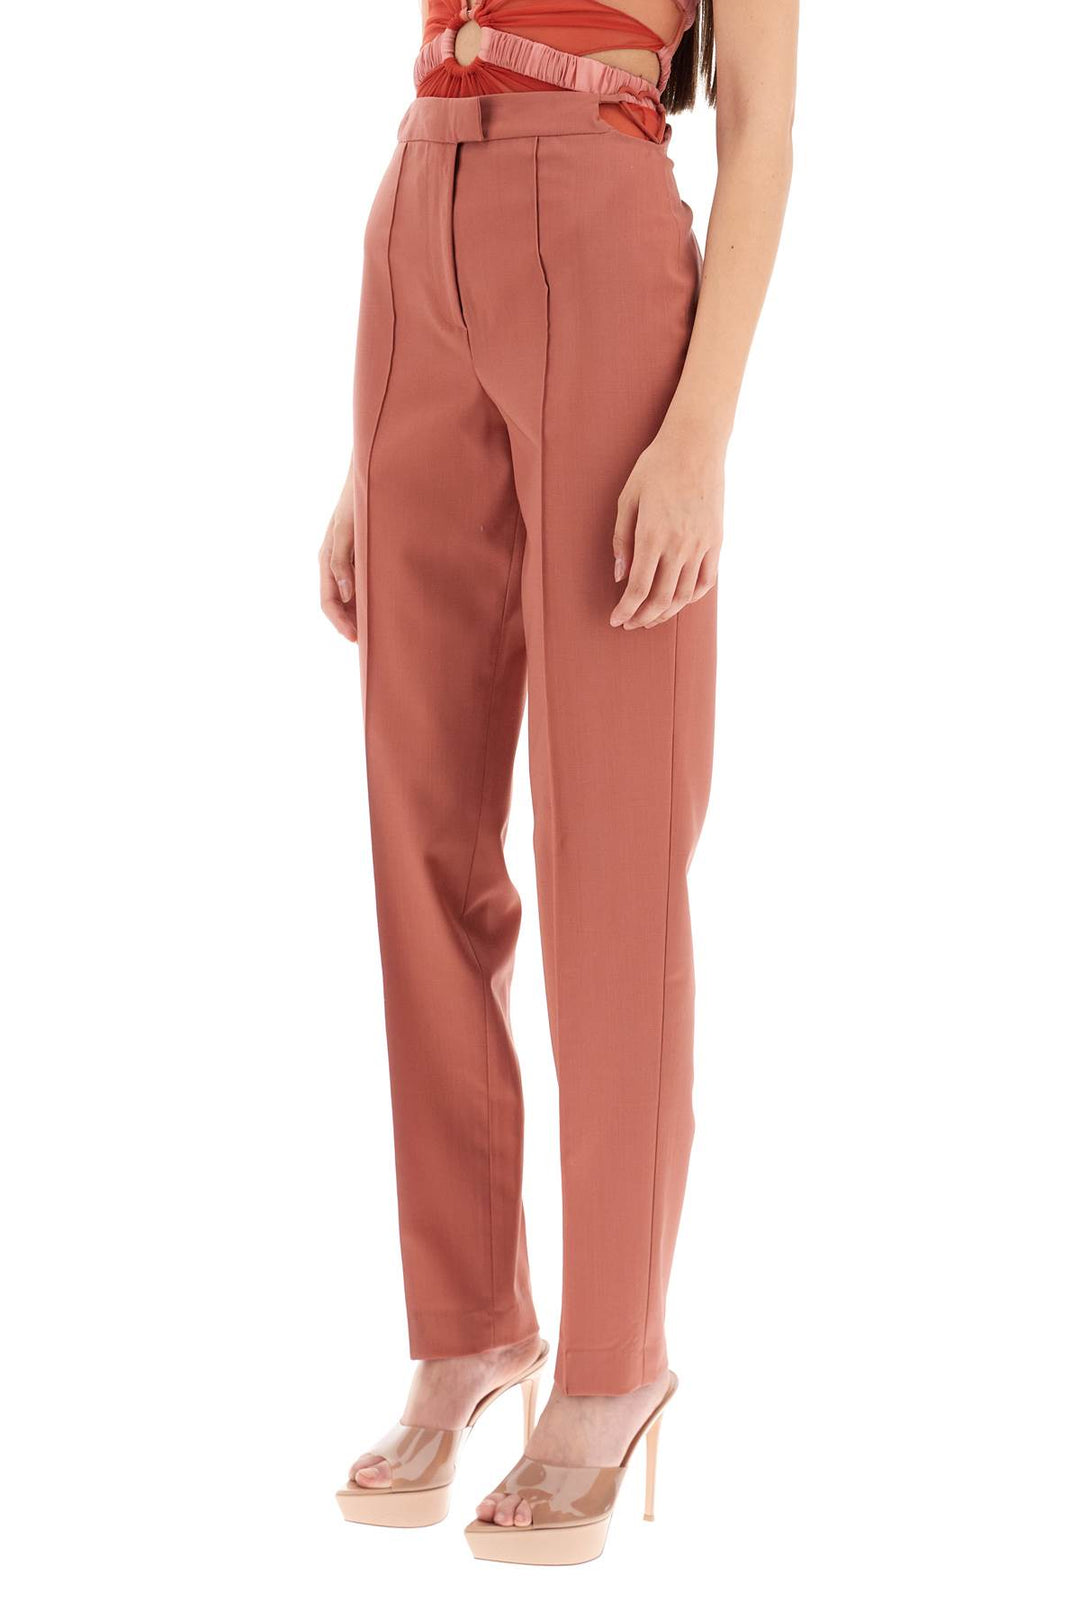 Nensi Dojaka Cool Virgin Wool Pants With Heart Shaped Details   Rosso